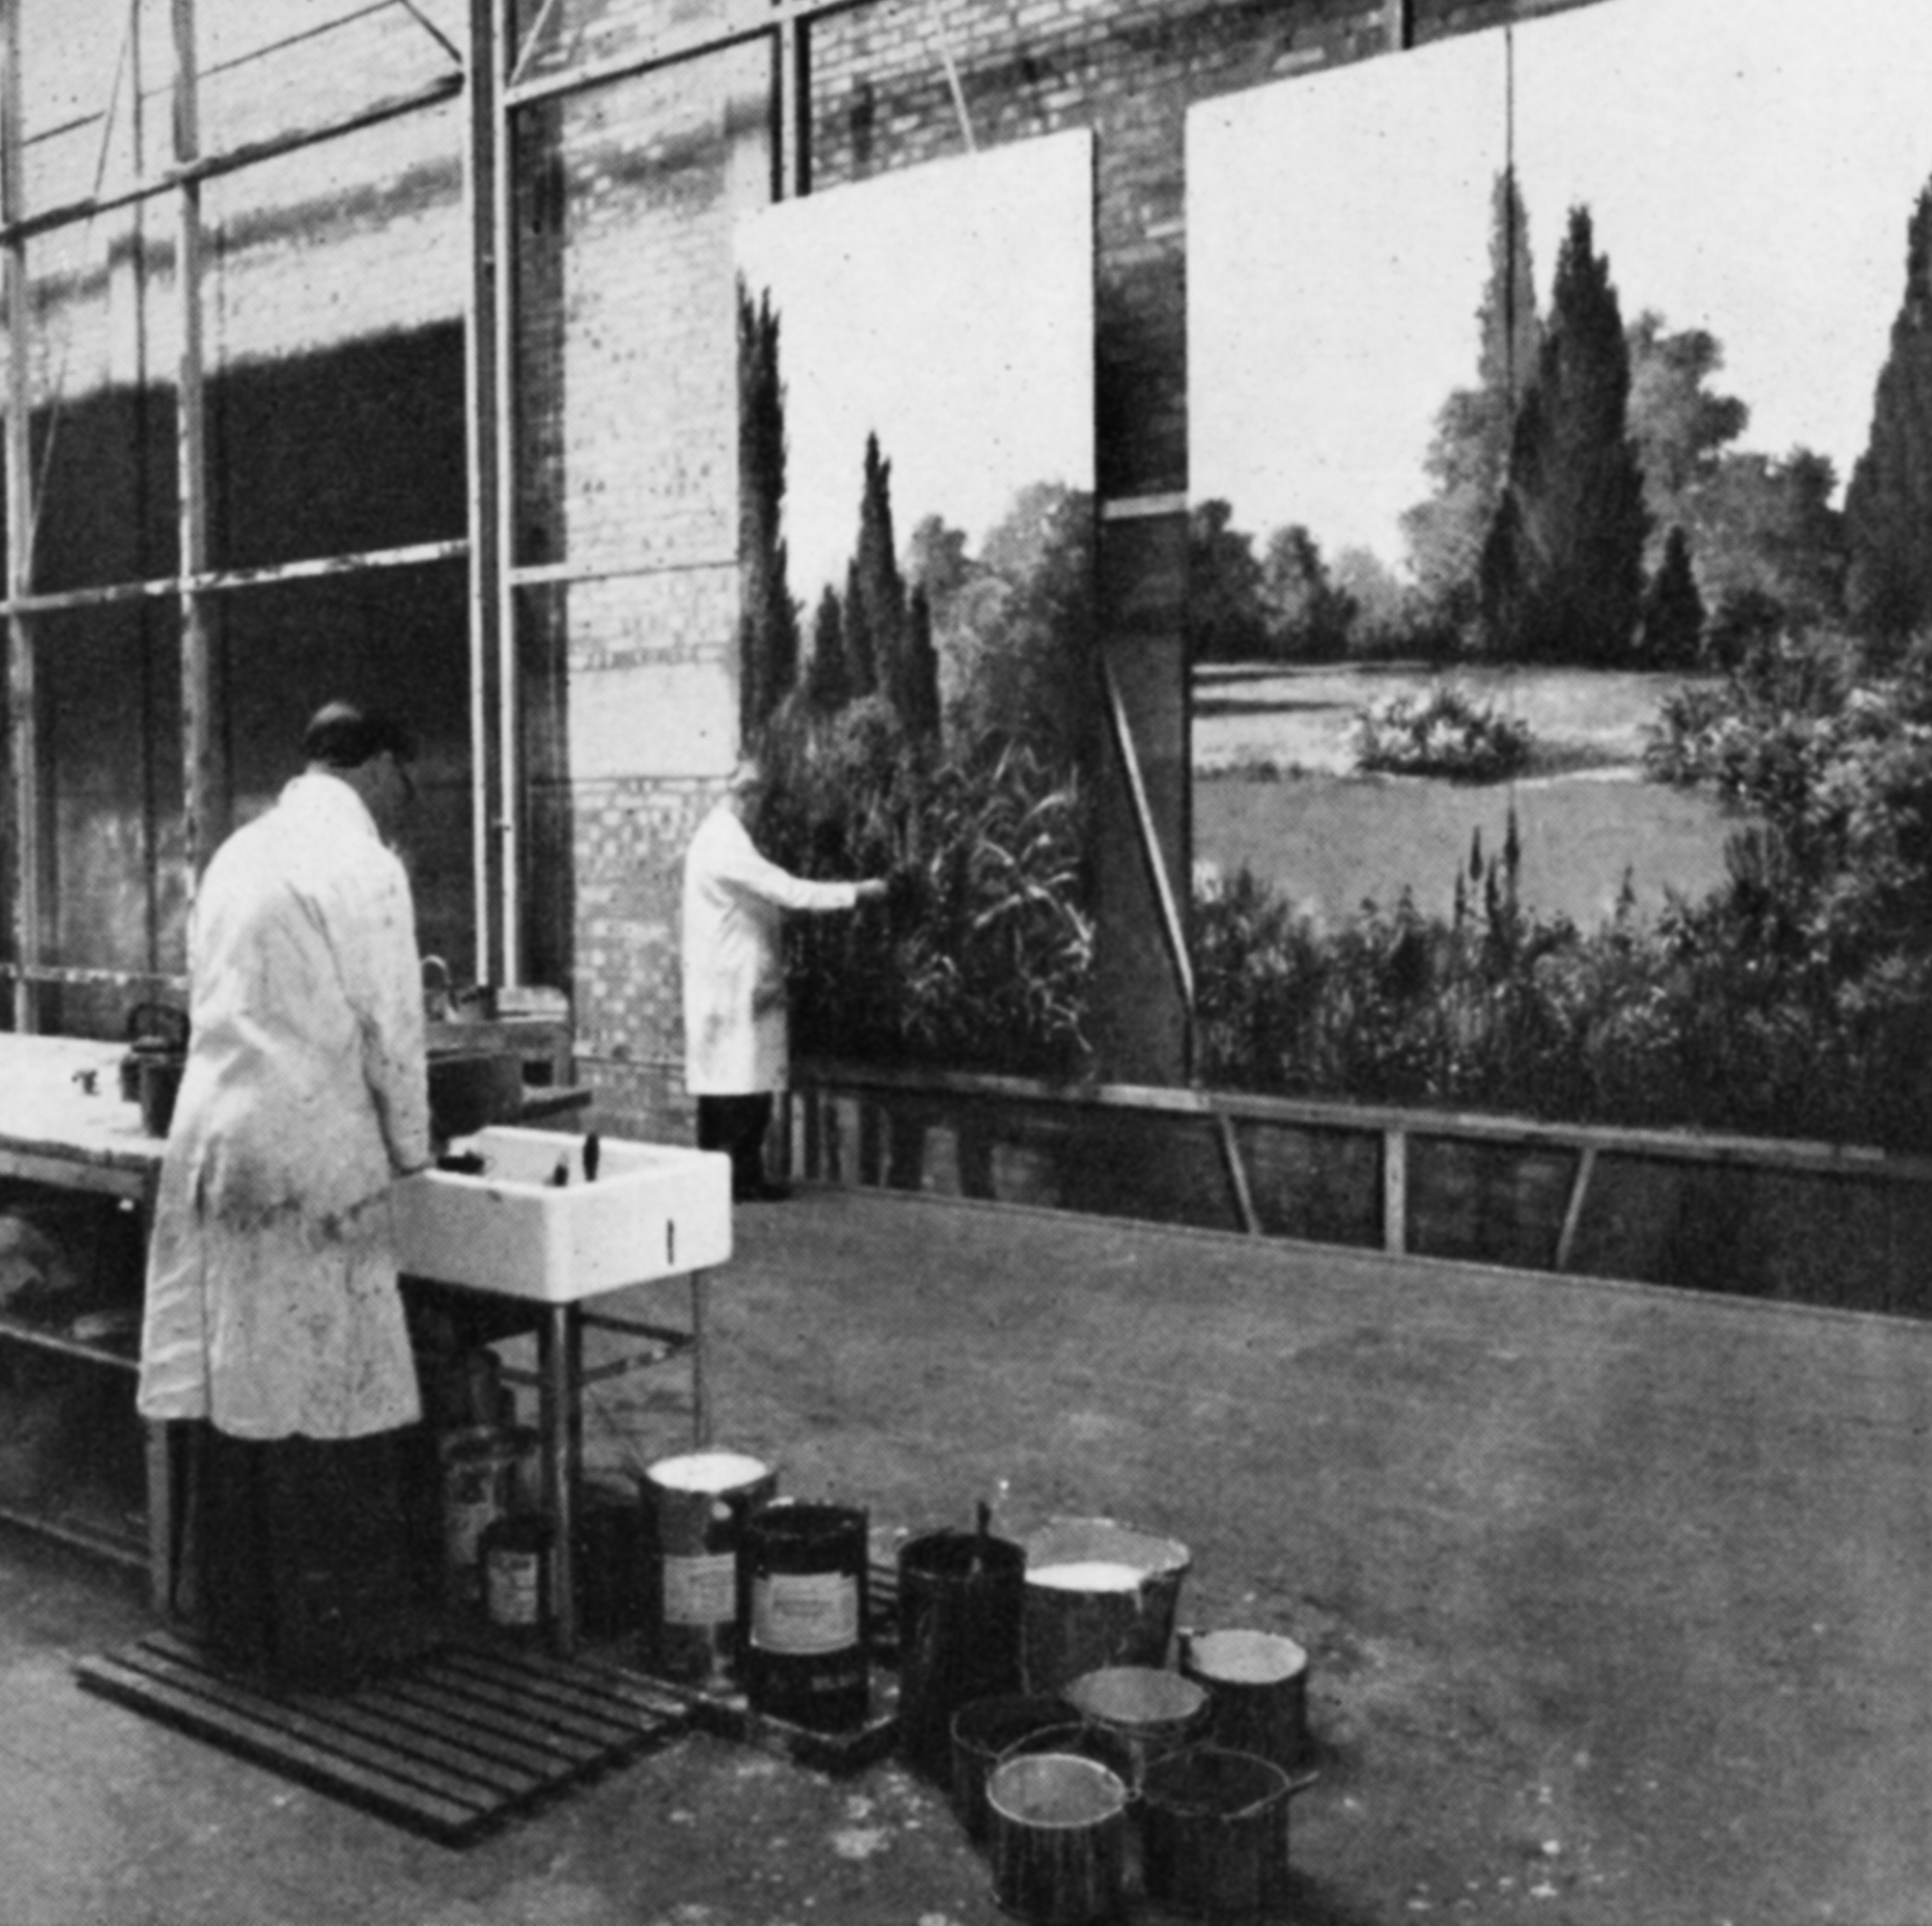 A man paints a garden scene on to a huge background cloth whilst another washes brushes in a sink.